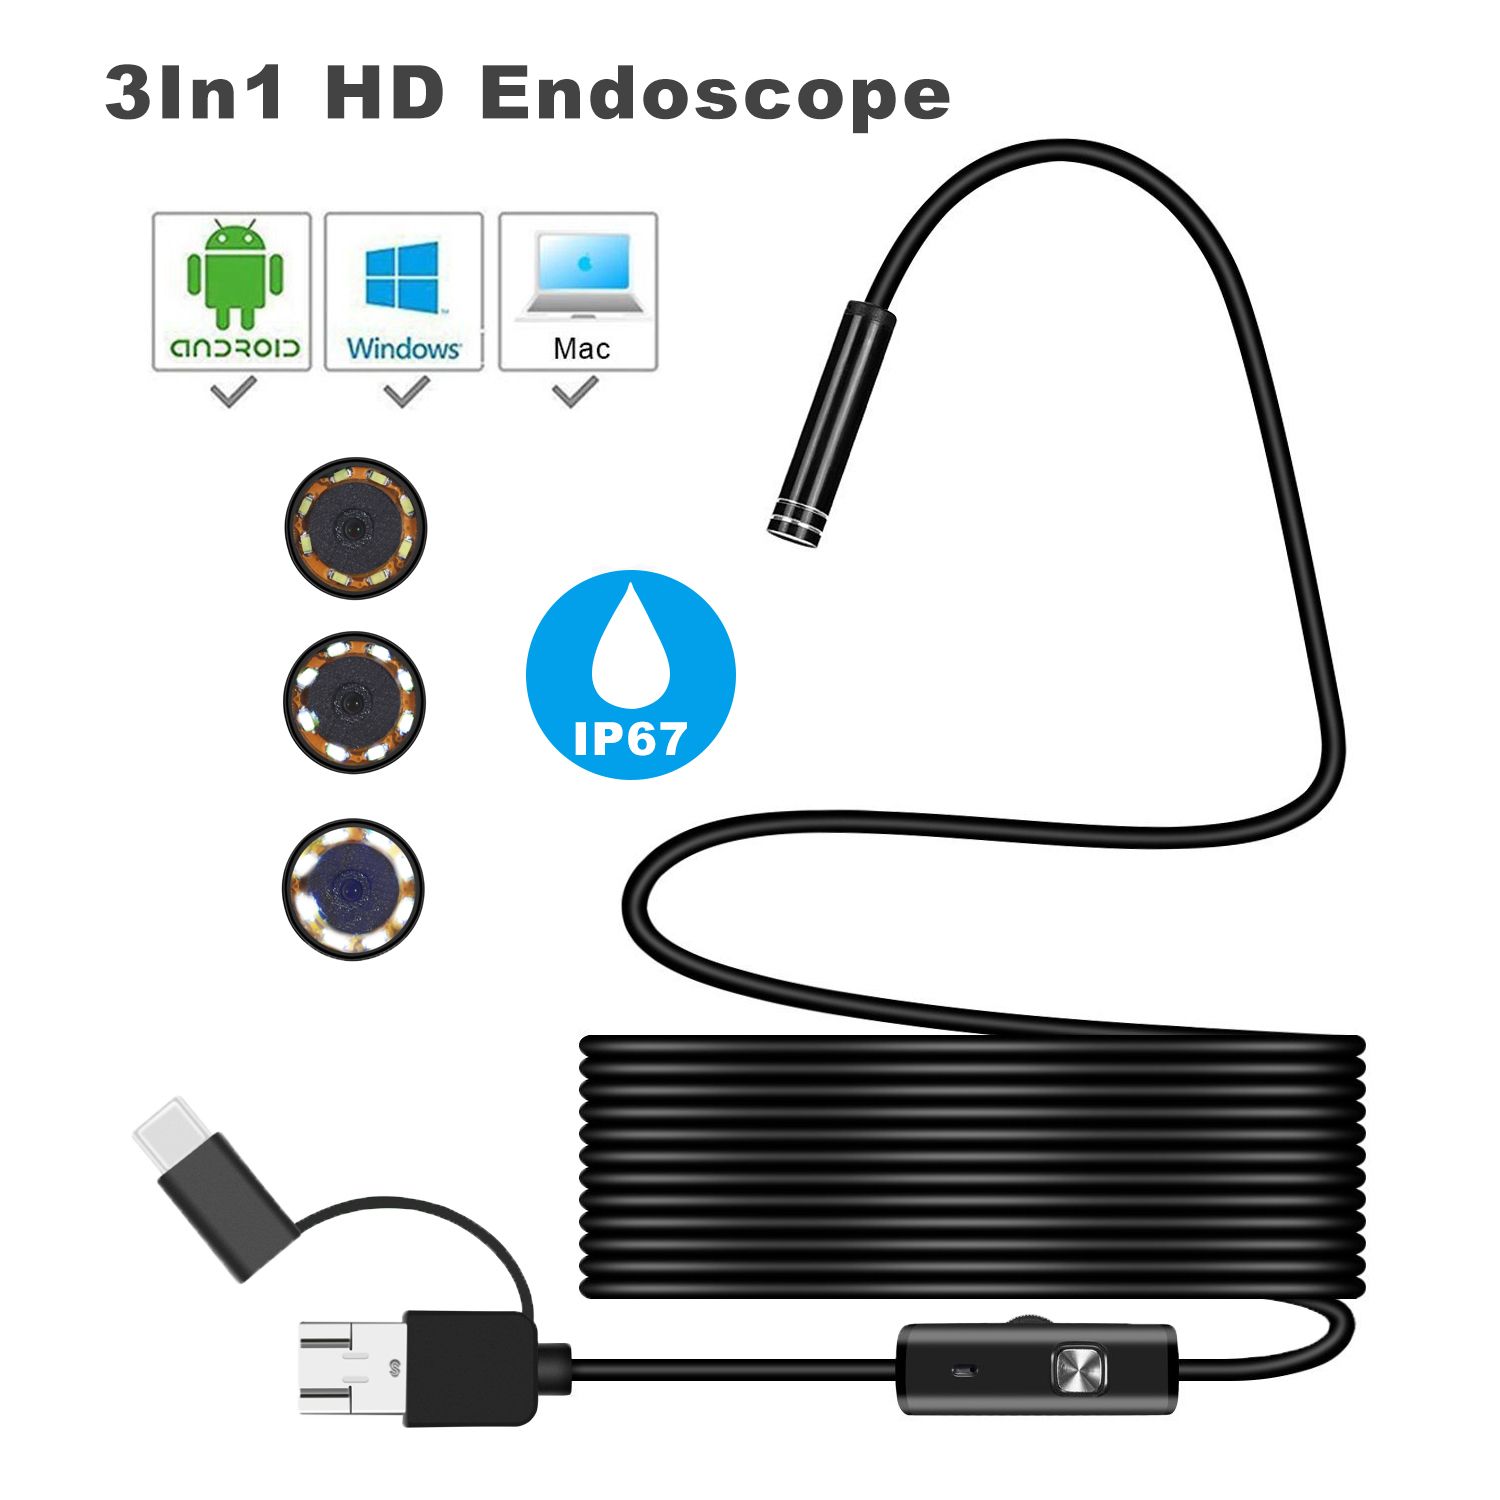 Bakeey-3-in-1-7mm-6Led-Type-C-Micro-USB-Borescope-Inspection-Camera-Soft-Cable-for-Android-PC-1193589